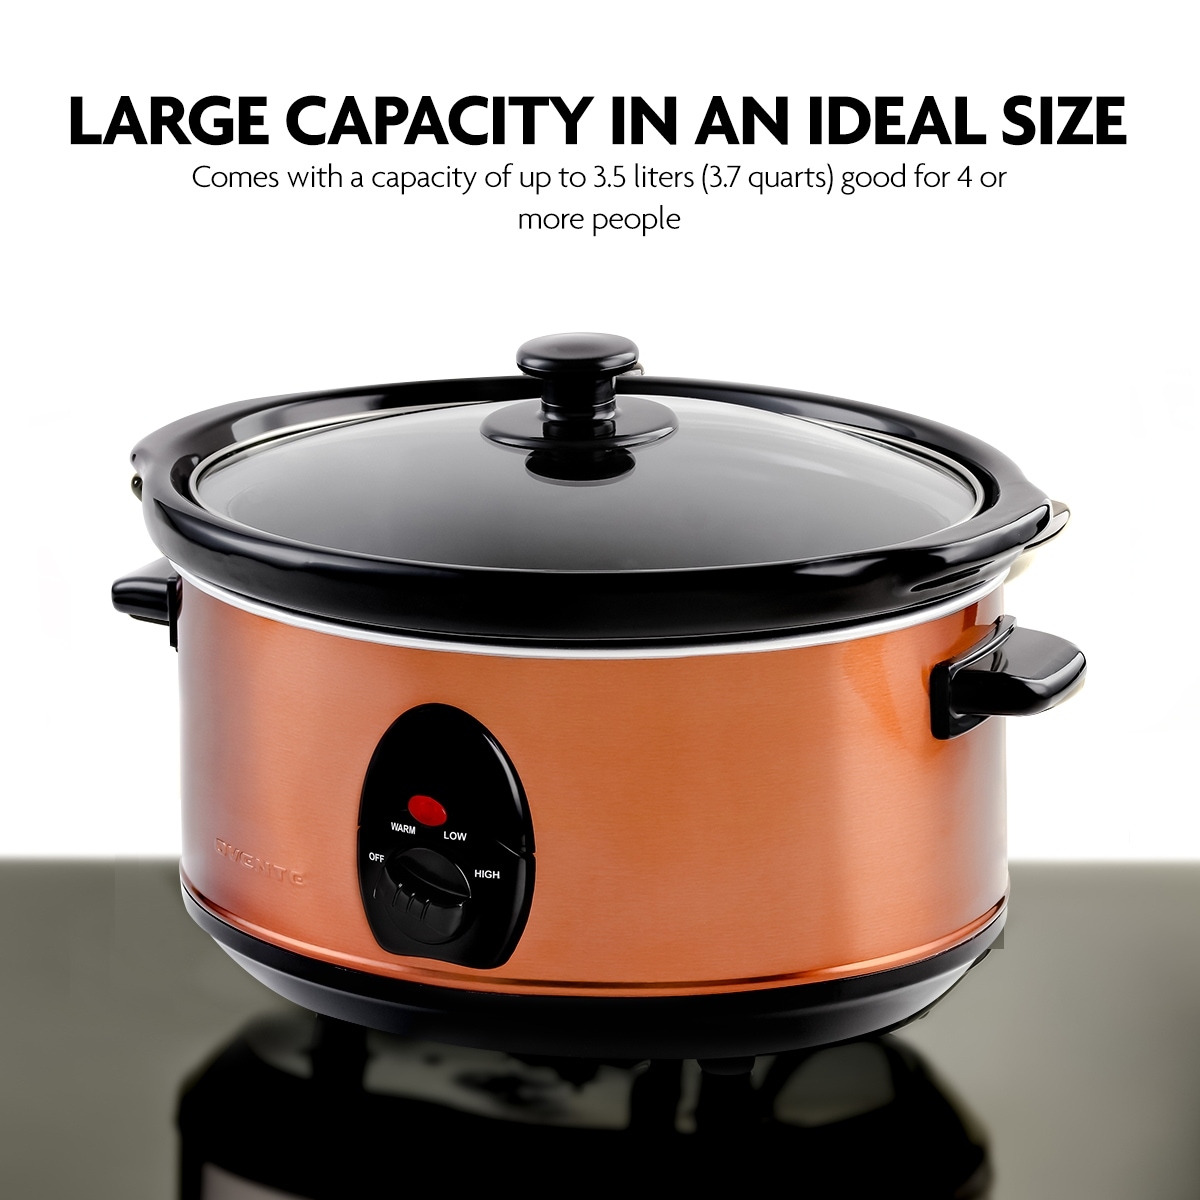 https://ak1.ostkcdn.com/images/products/is/images/direct/366f356ed7c0c1cdb1ced32b37f53b27ecd552bf/Ovente-Slow-Cooker-Crockpot-3.5-Liter-with-Removable-Ceramic-Pot-3-Cooking-Setting-and-Heat-Tempered-Glass-Lid%2C-SLO35-Series.jpg